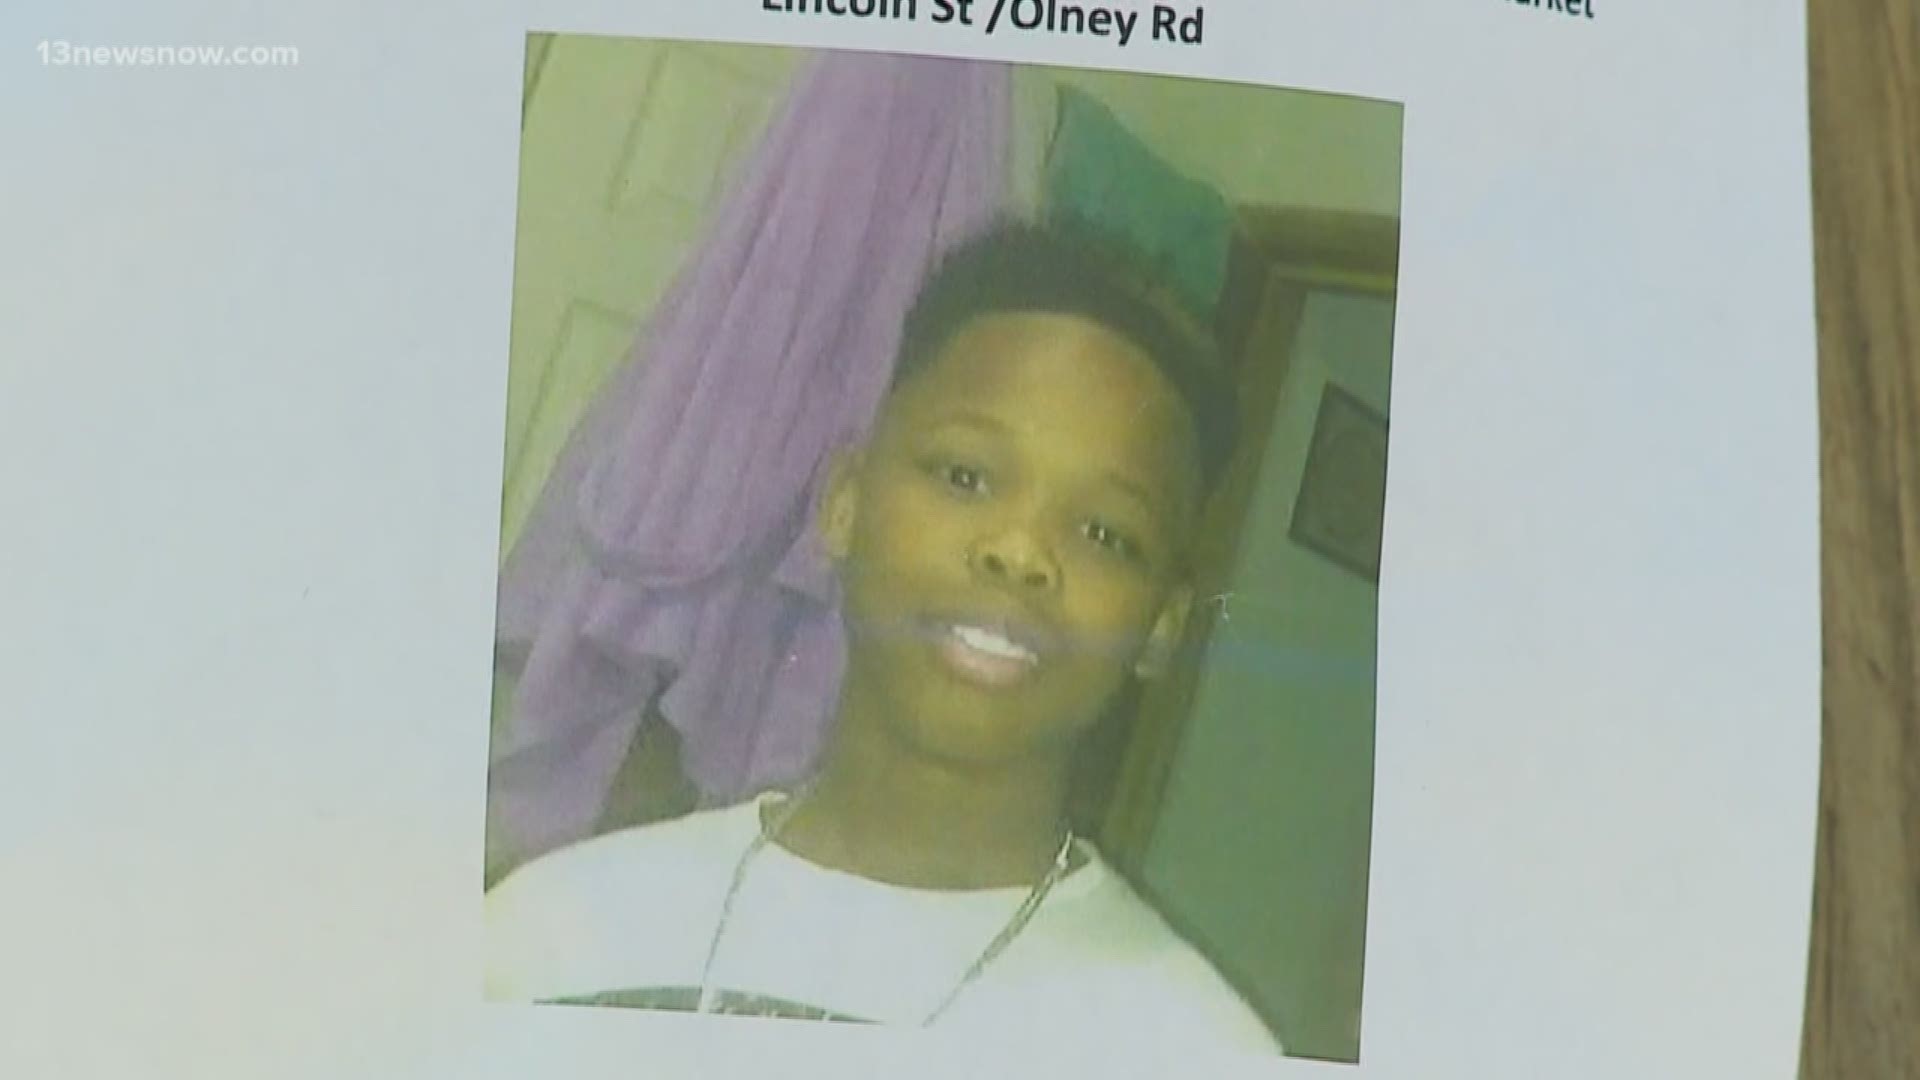 Neighbors are calling for an end to violence and crime after 13-year-old JayDon Davis was shot and killed.